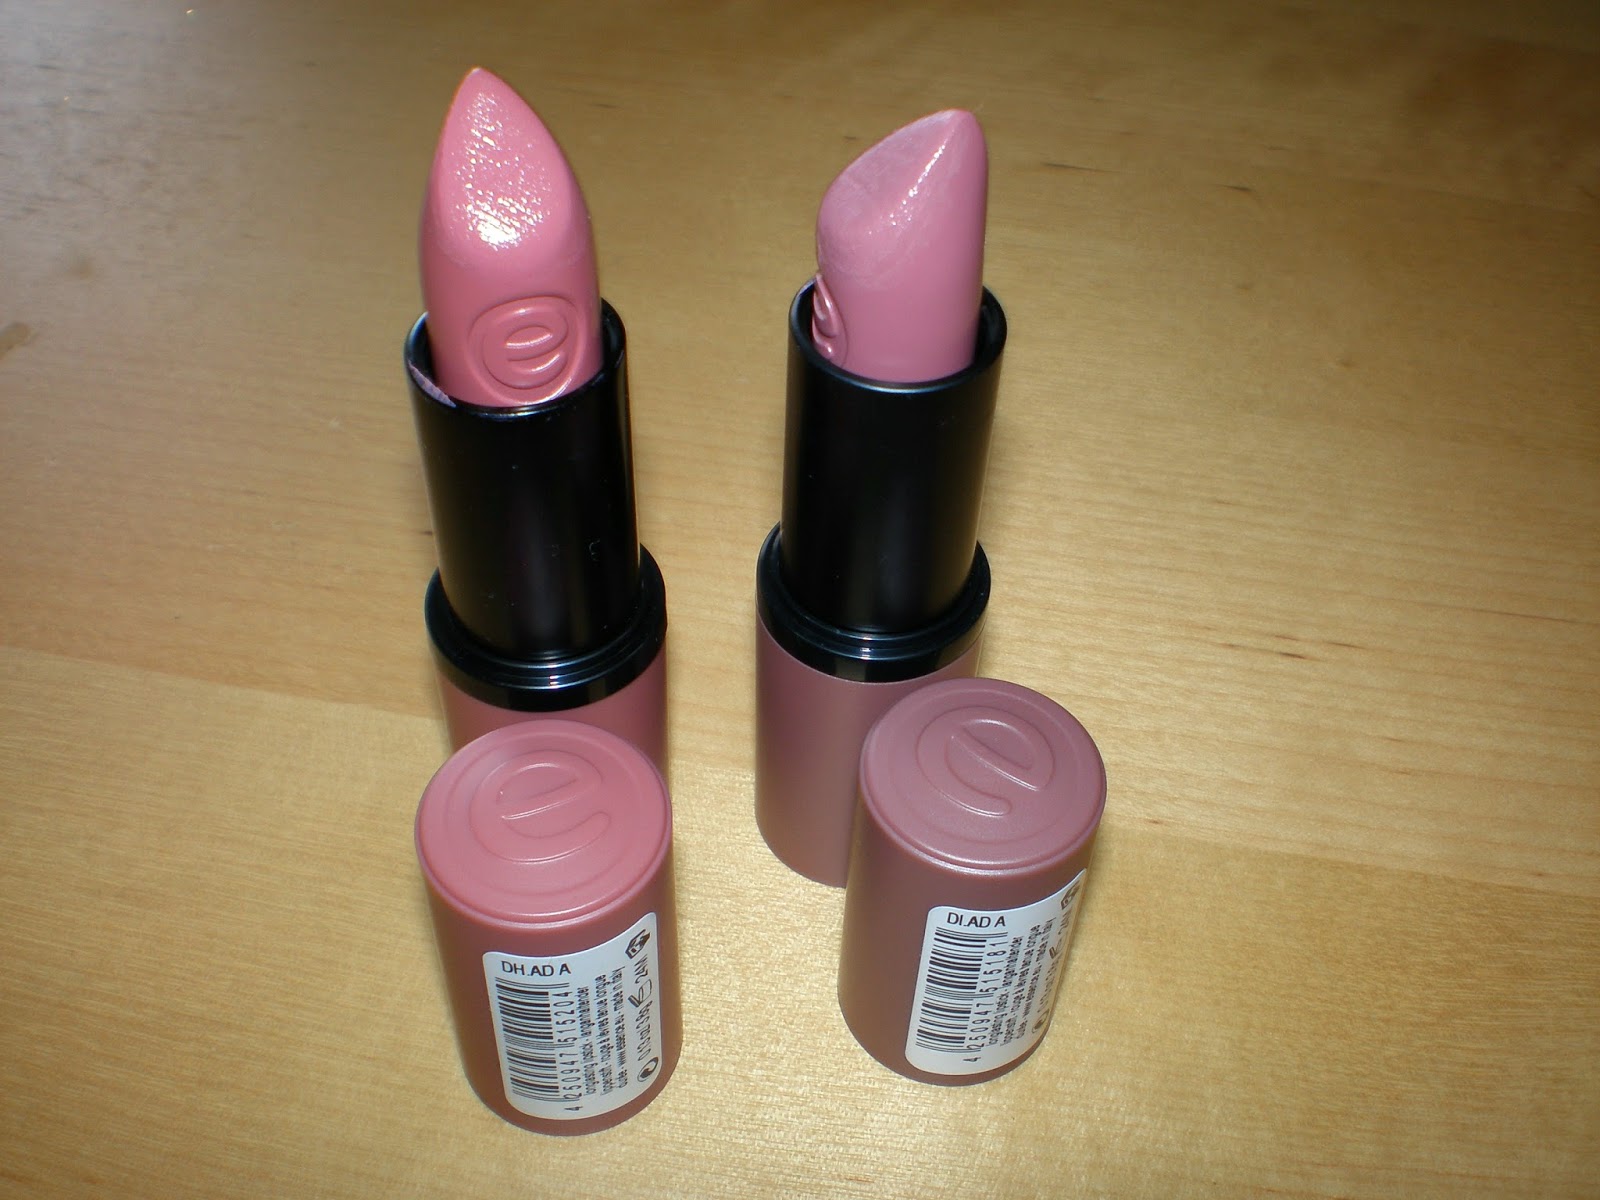 Lipsticks in 05 Cool Nude (left) and 03 Come Naturally (right)